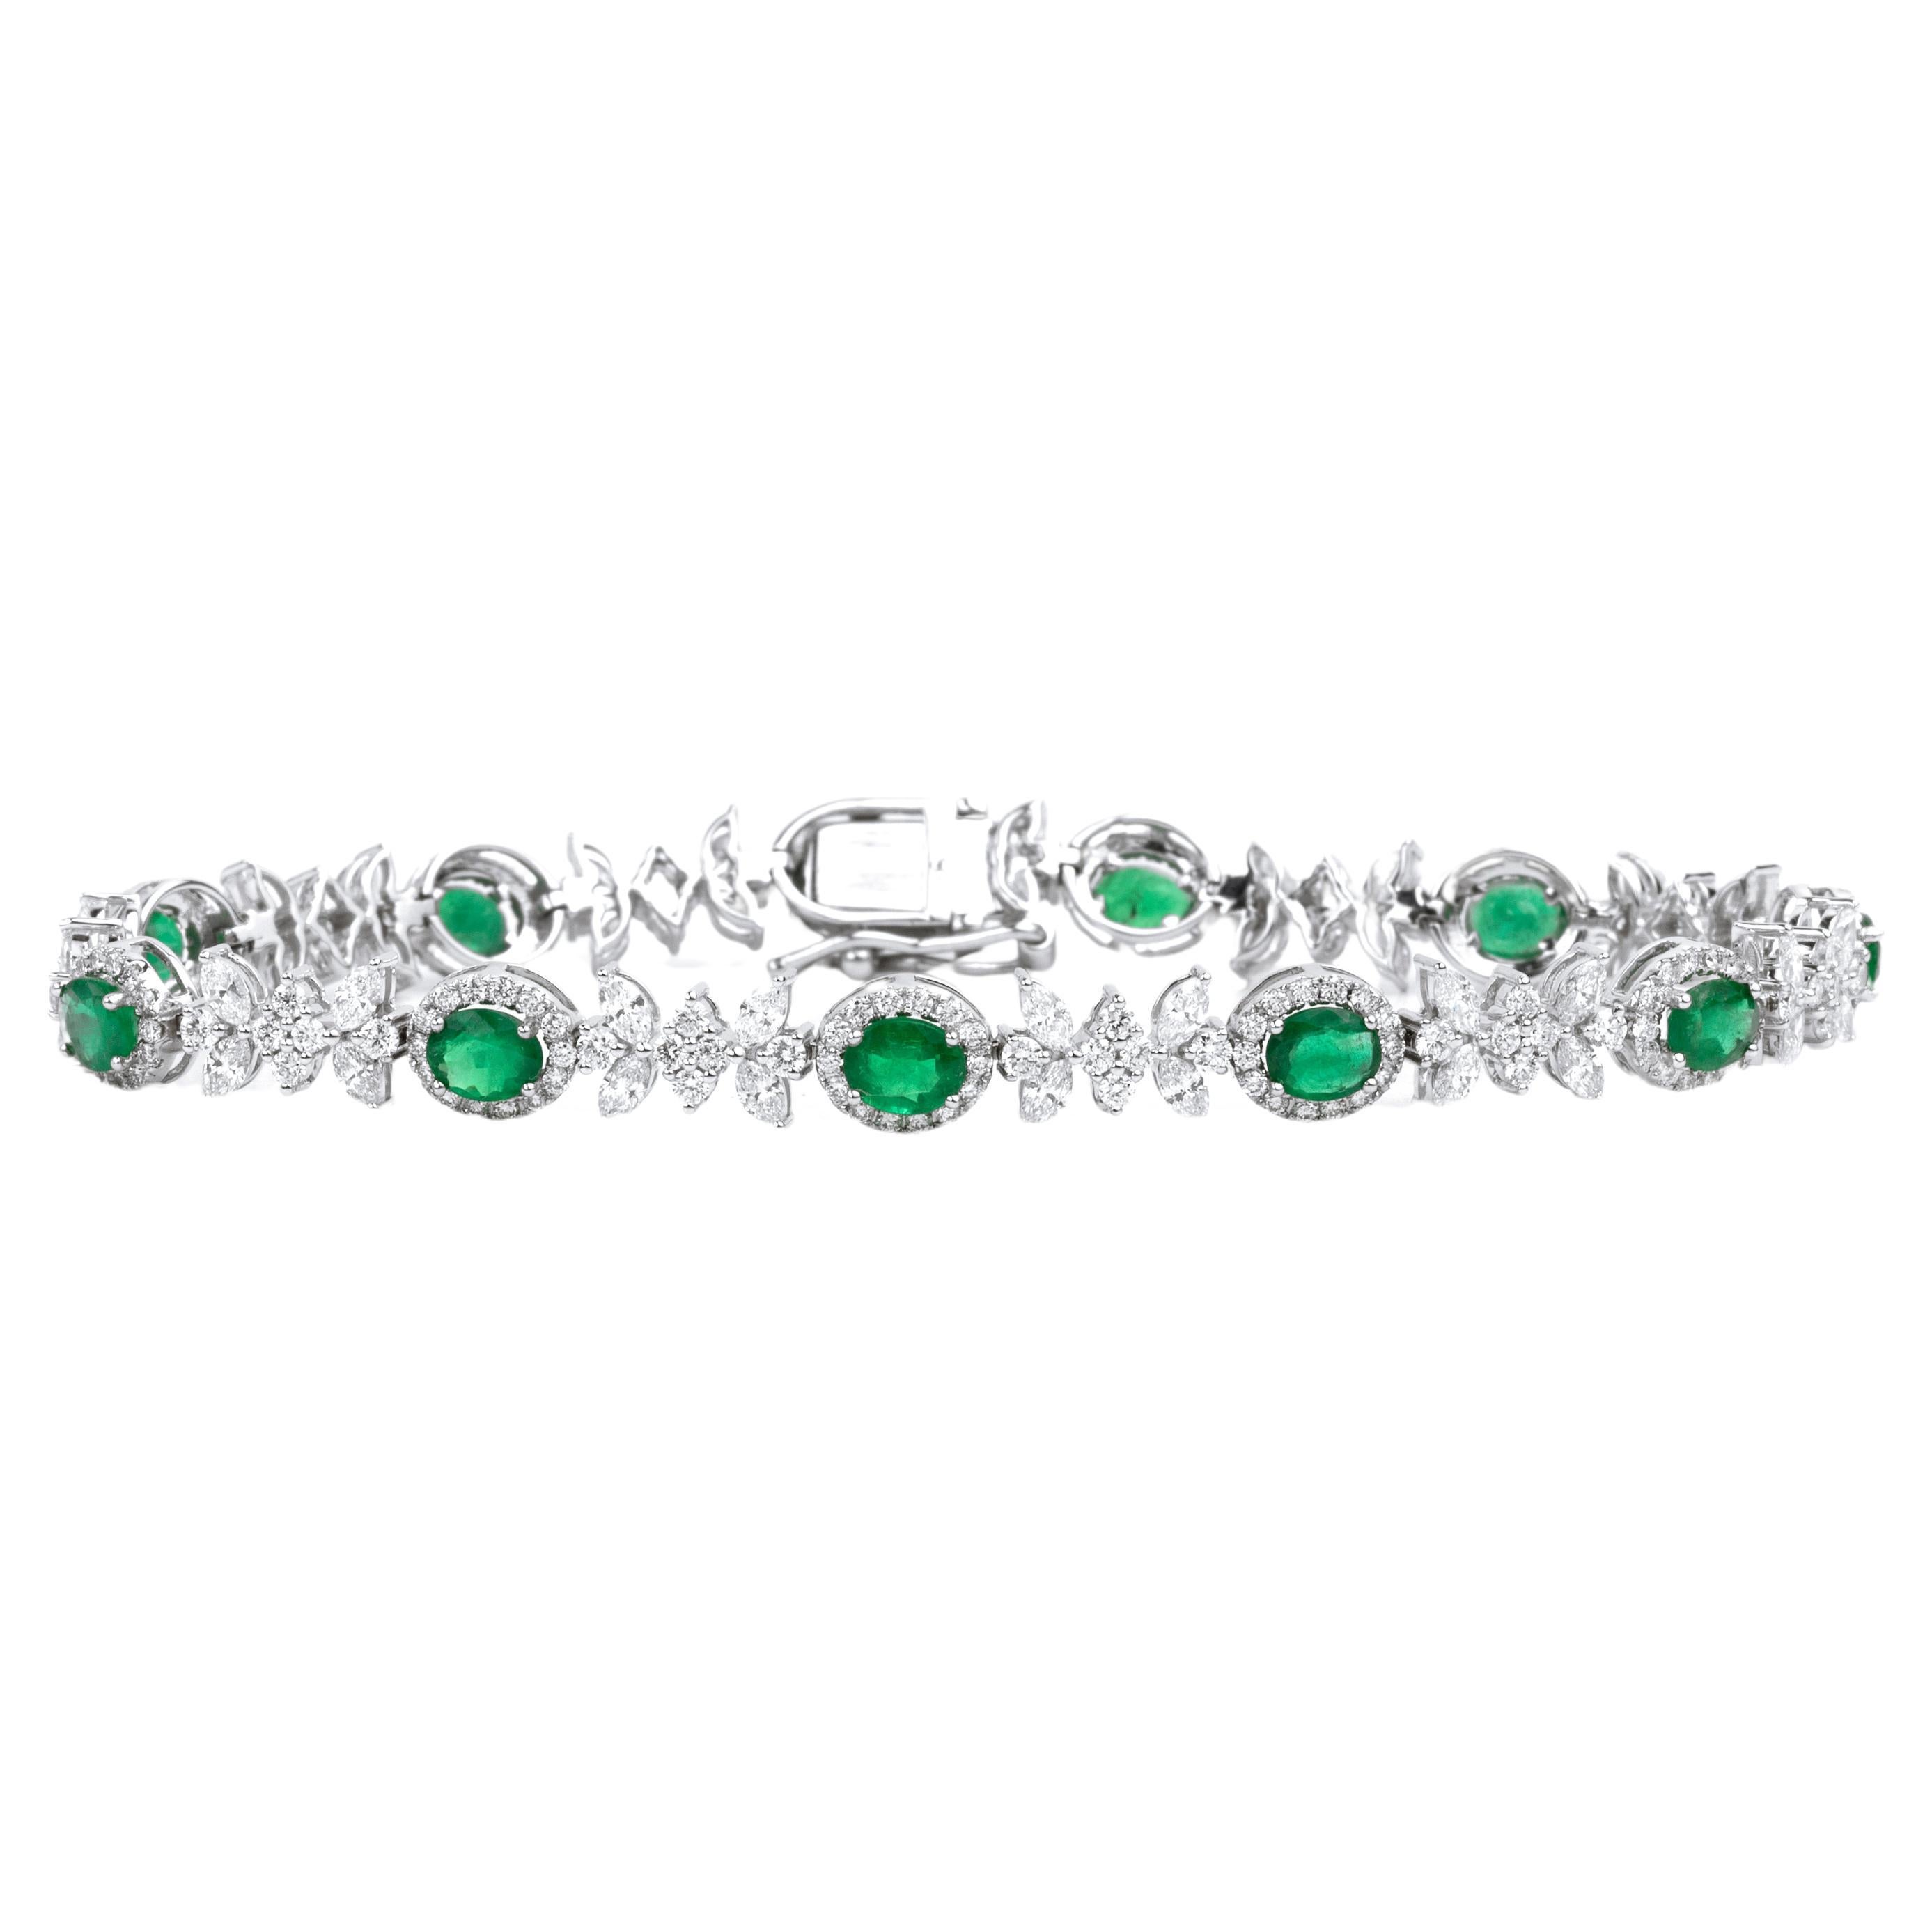 Exceptional 4.5 Ct Oval Cut Natural Emerald Bracelet with diamond 18k White Gold For Sale